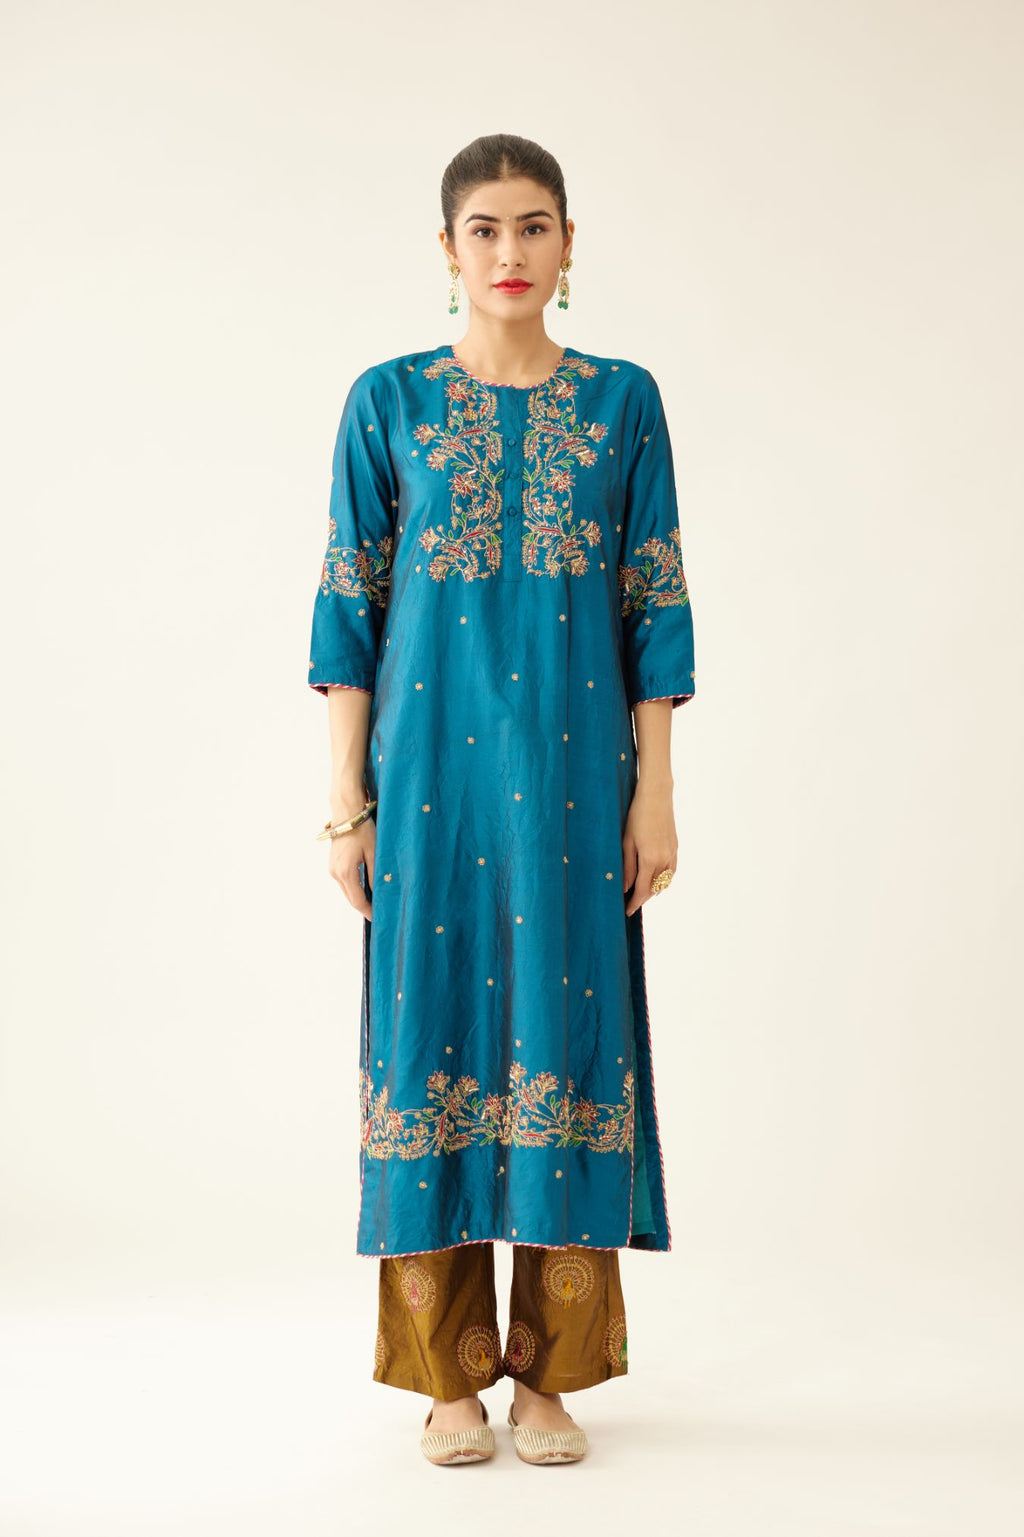 Dark teal straight silk kurta set, highlighted with delicate dori and thread embroidery detailed with contrasting bead and sequins work.